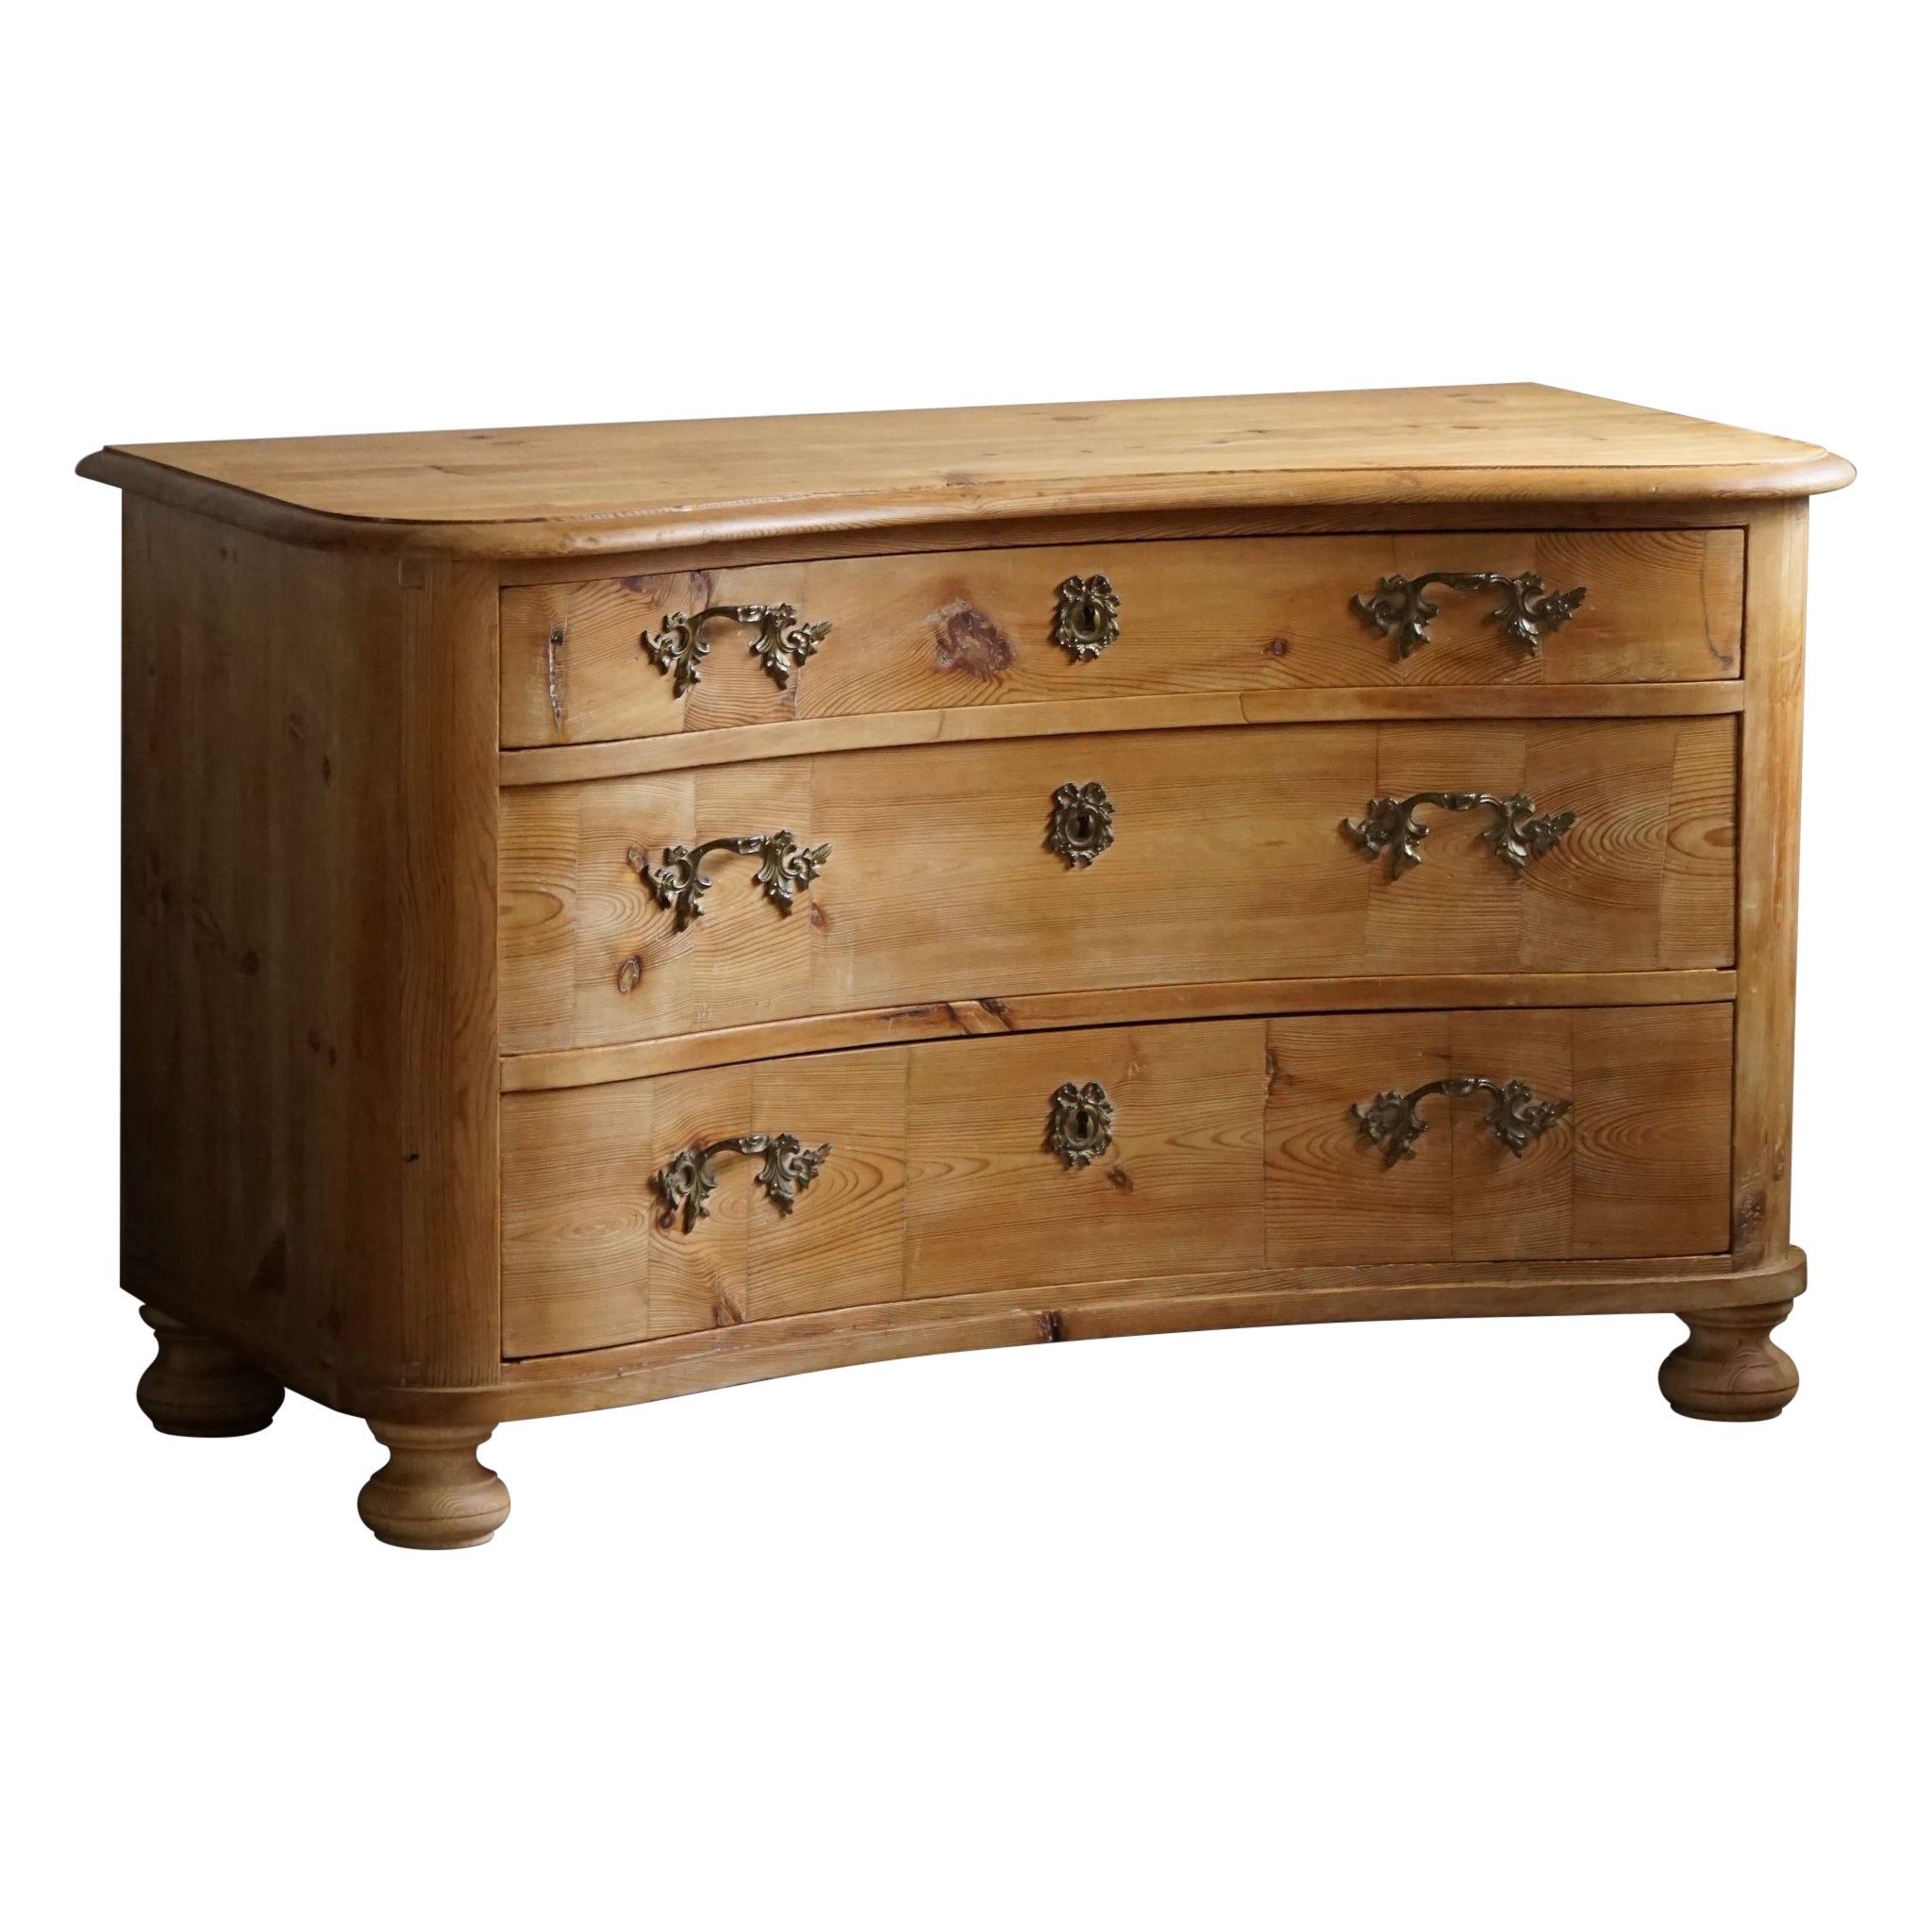 Antique Chest of Drawer, Made by a Danish Cabinetmaker, Late 19th Century